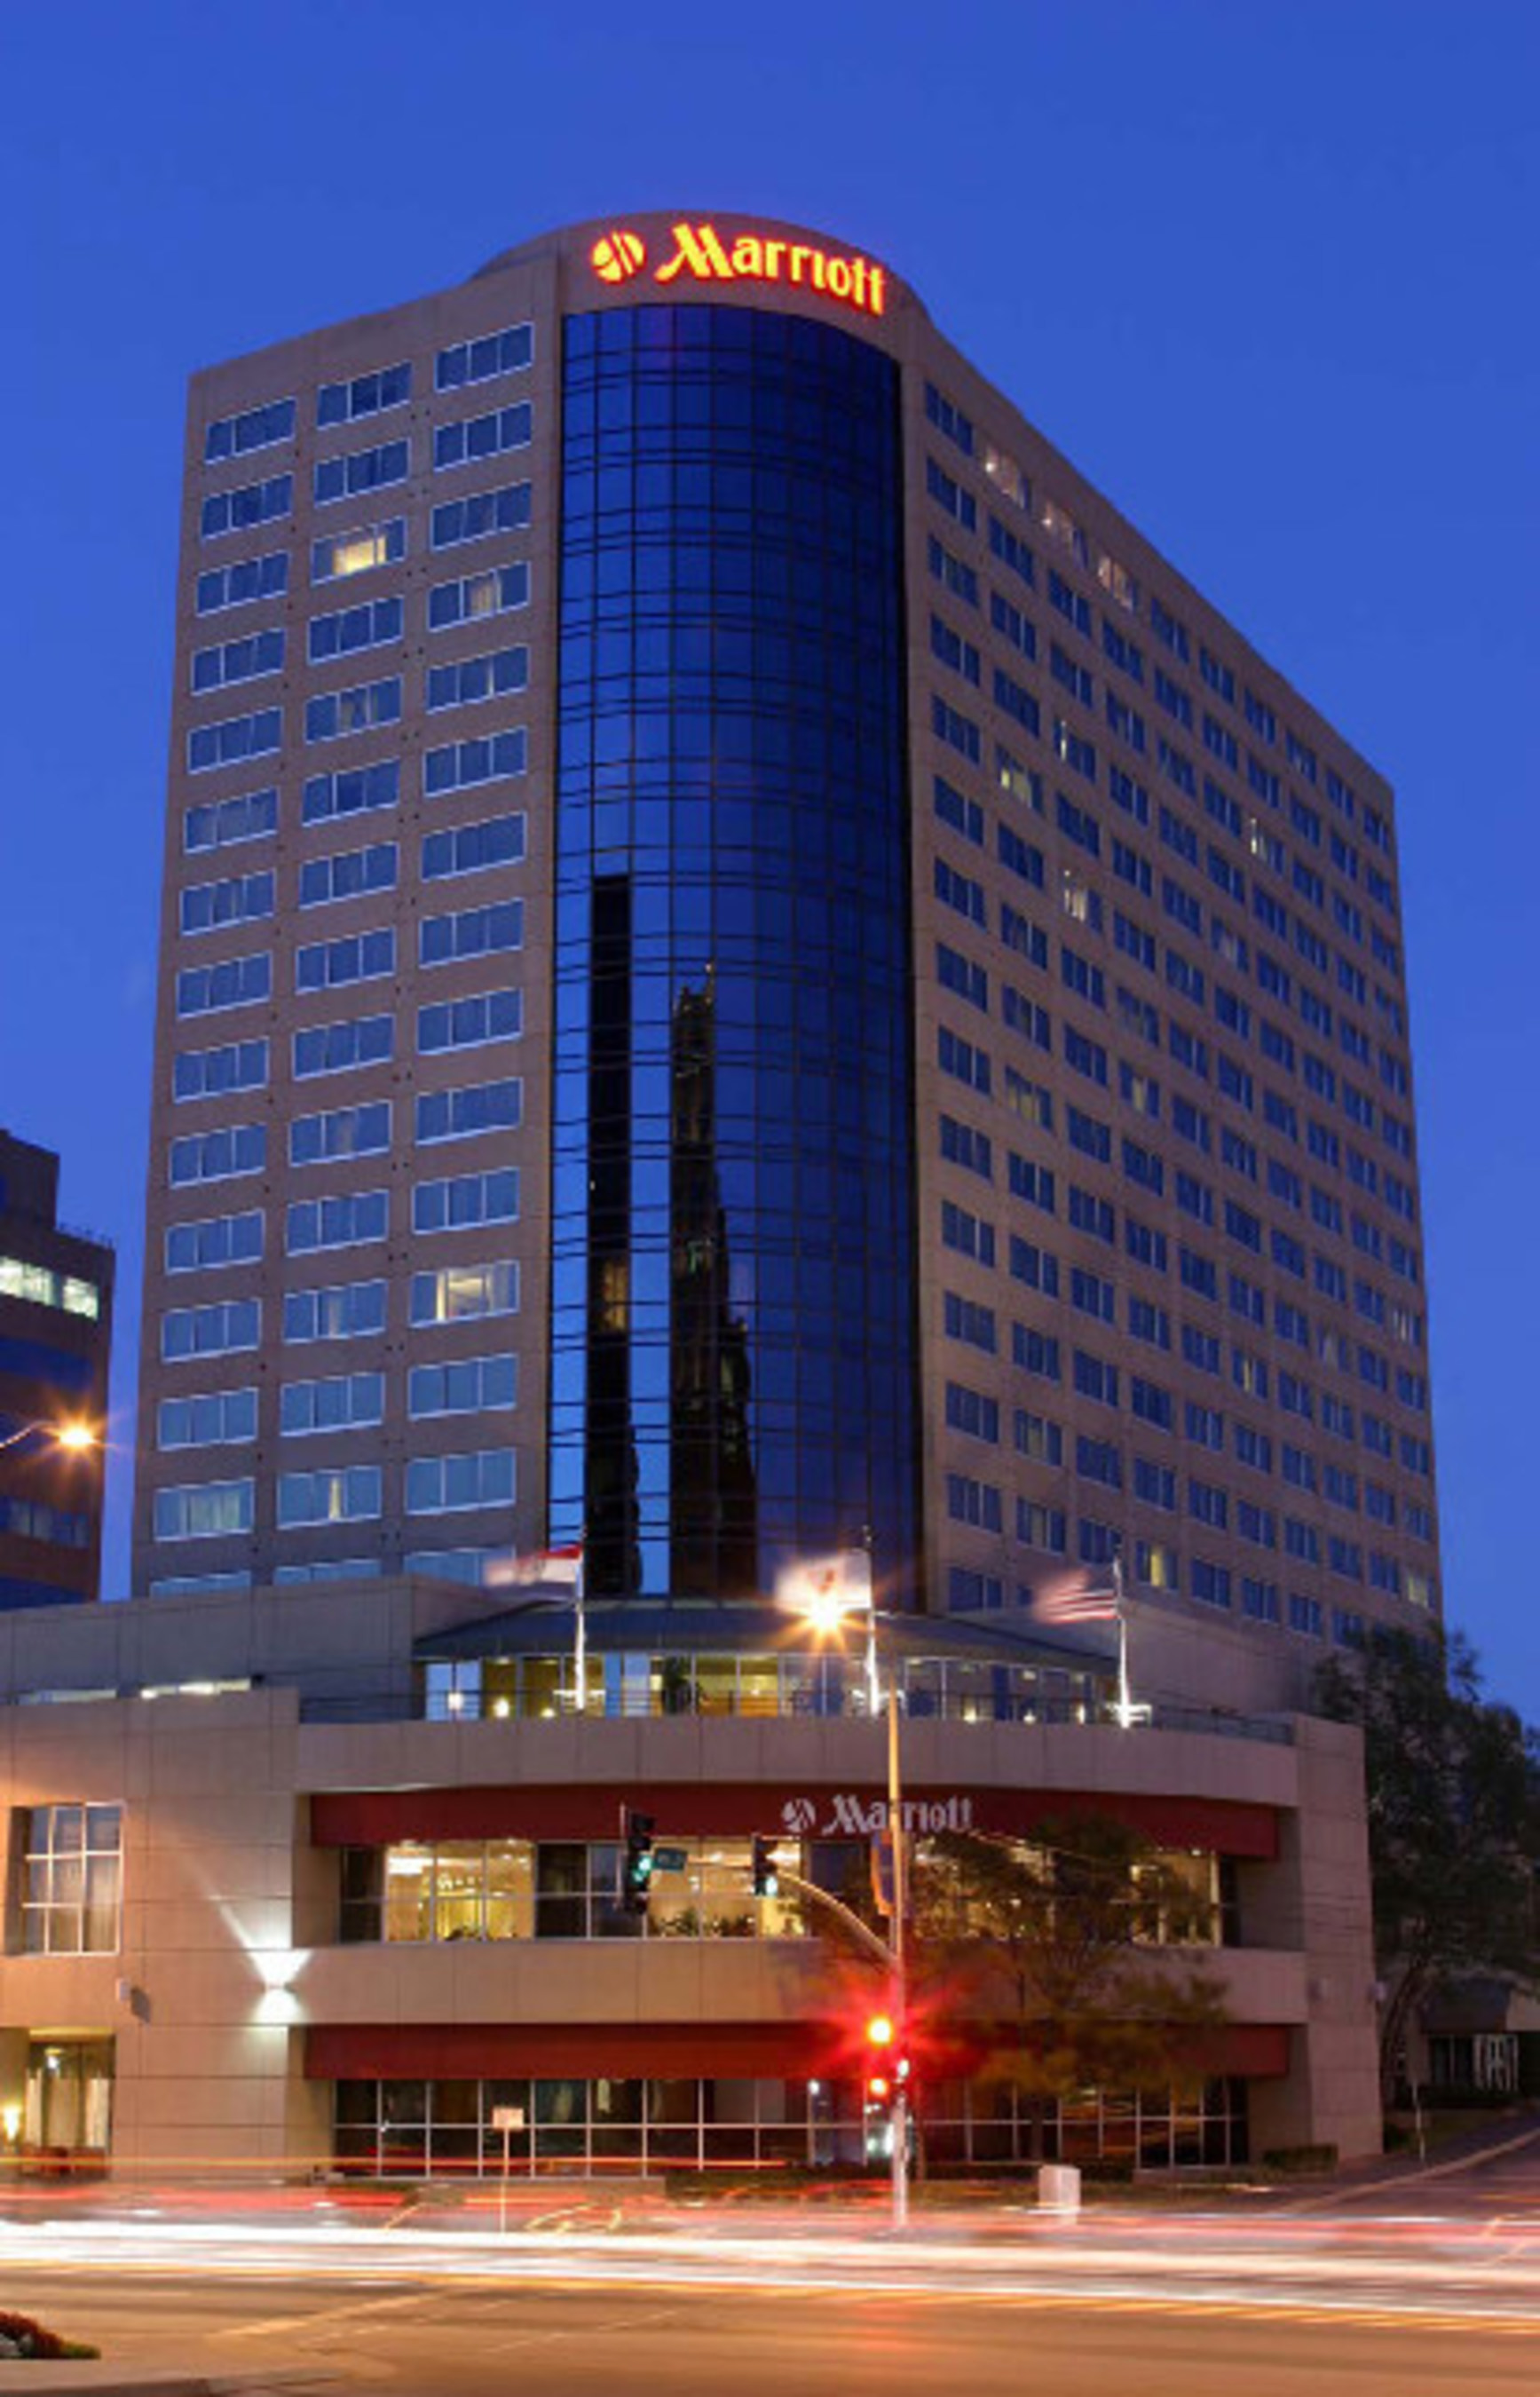 CWI acquires the Kansas City Marriott Country Club Plaza, a 295-room full-service hotel, located in Kansas City, MO for $57 million.